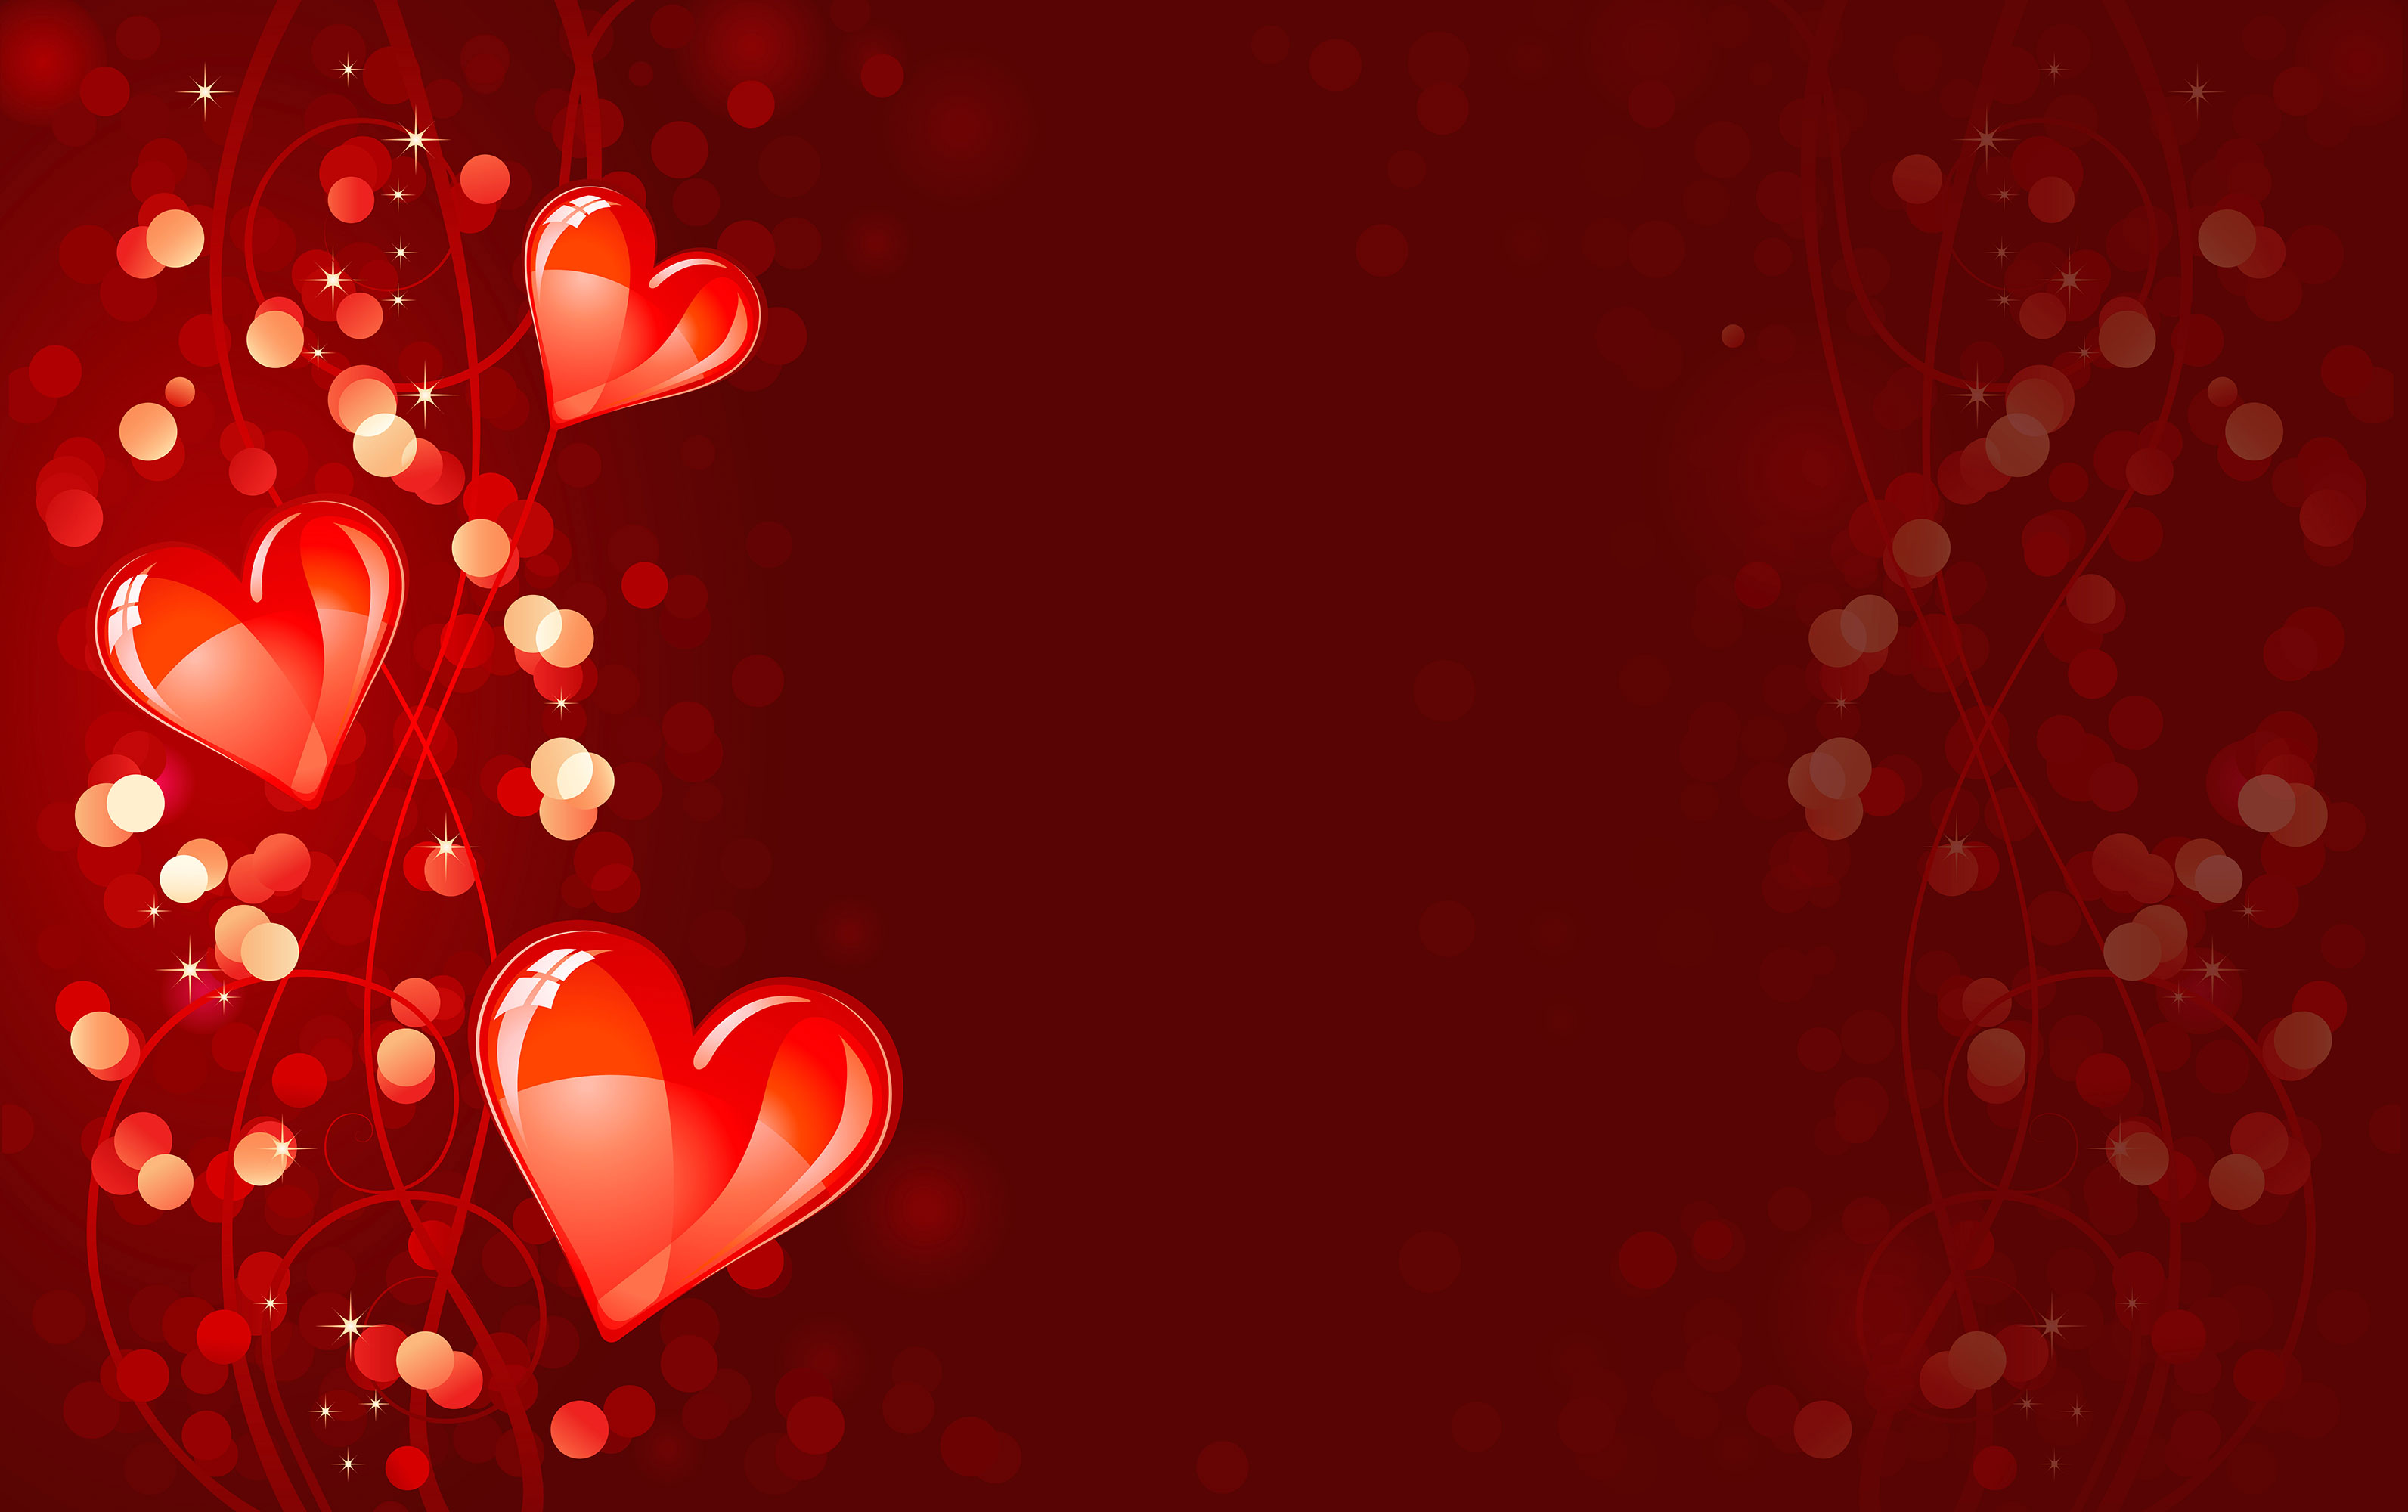 Valentines Day 2013 Red Background with Hearts Illustartion